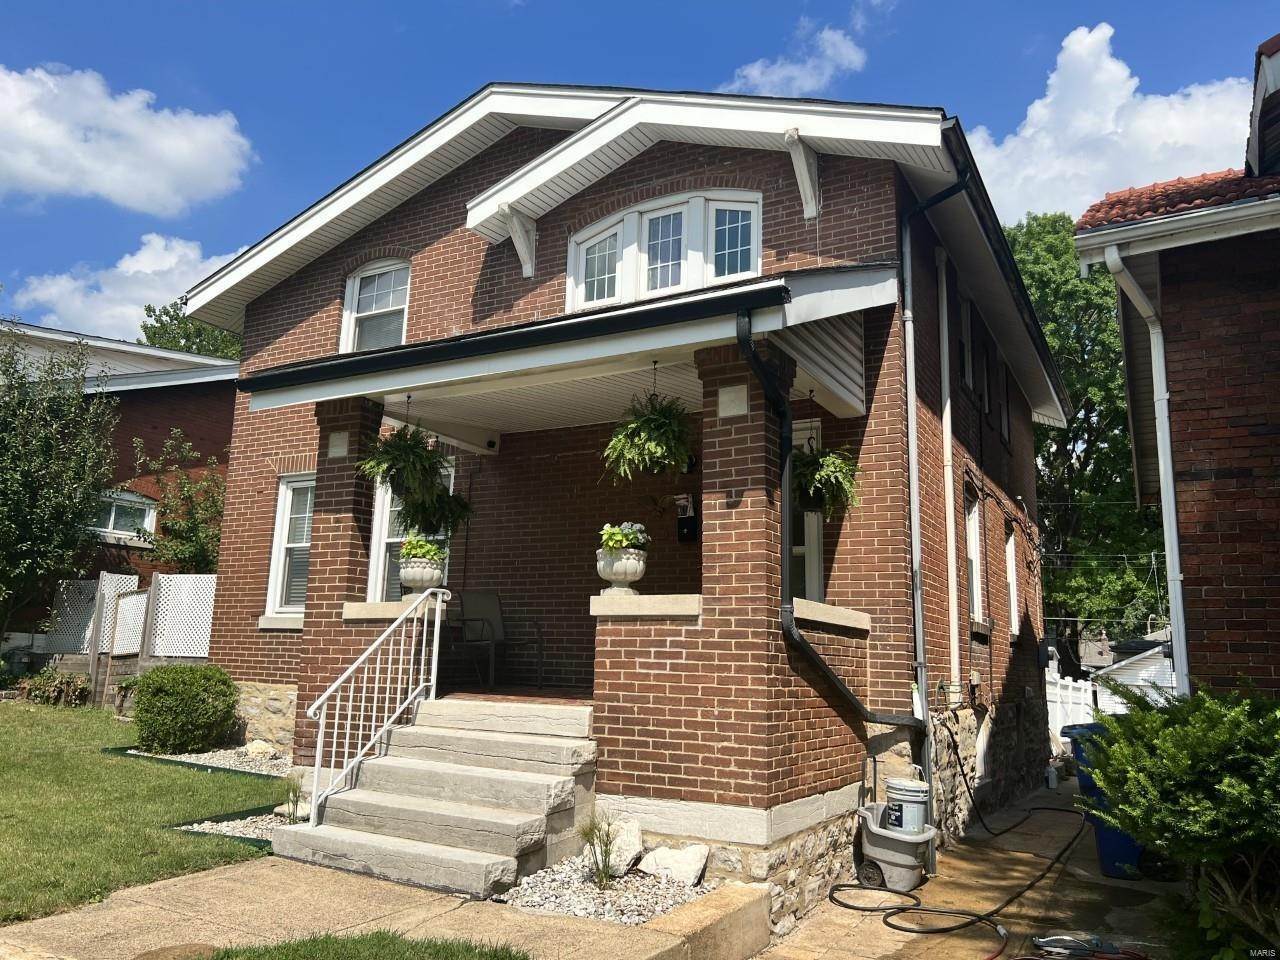 Property for Sale at 1926 Mccausland Avenue St. Louis, Missouri 63117 United States